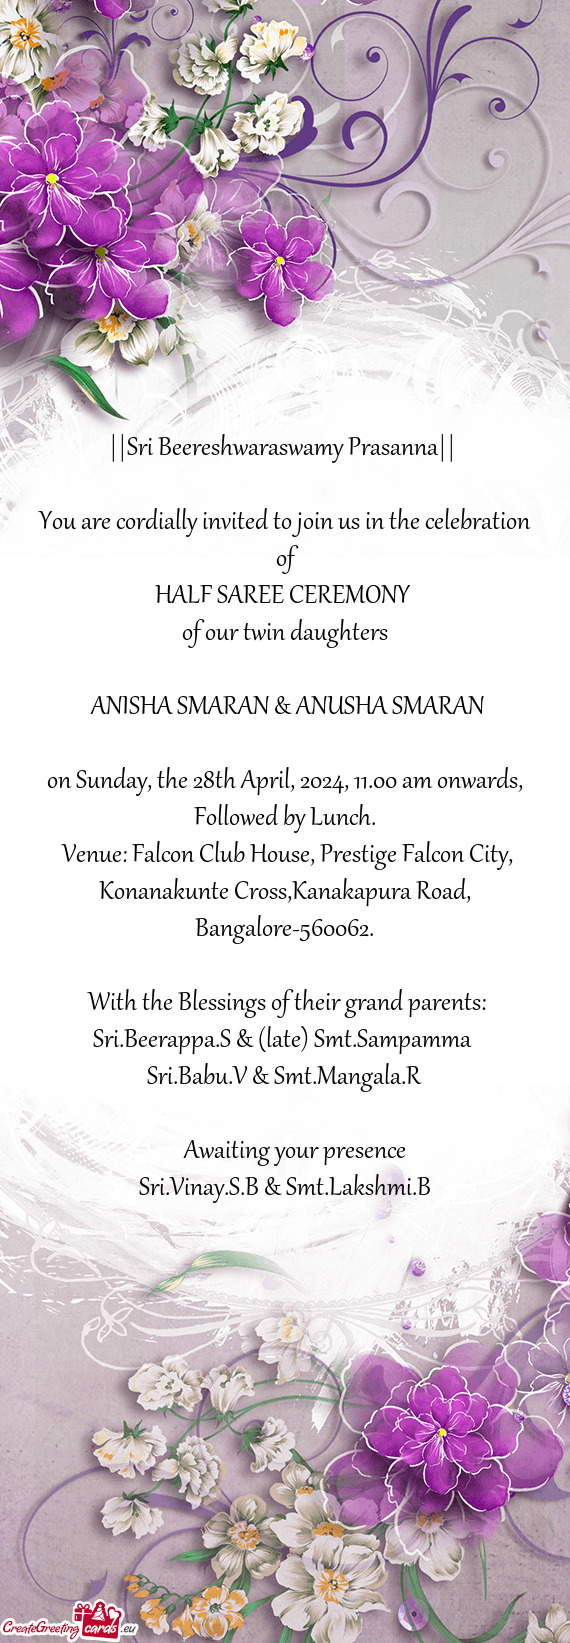 You are cordially invited to join us in the celebration